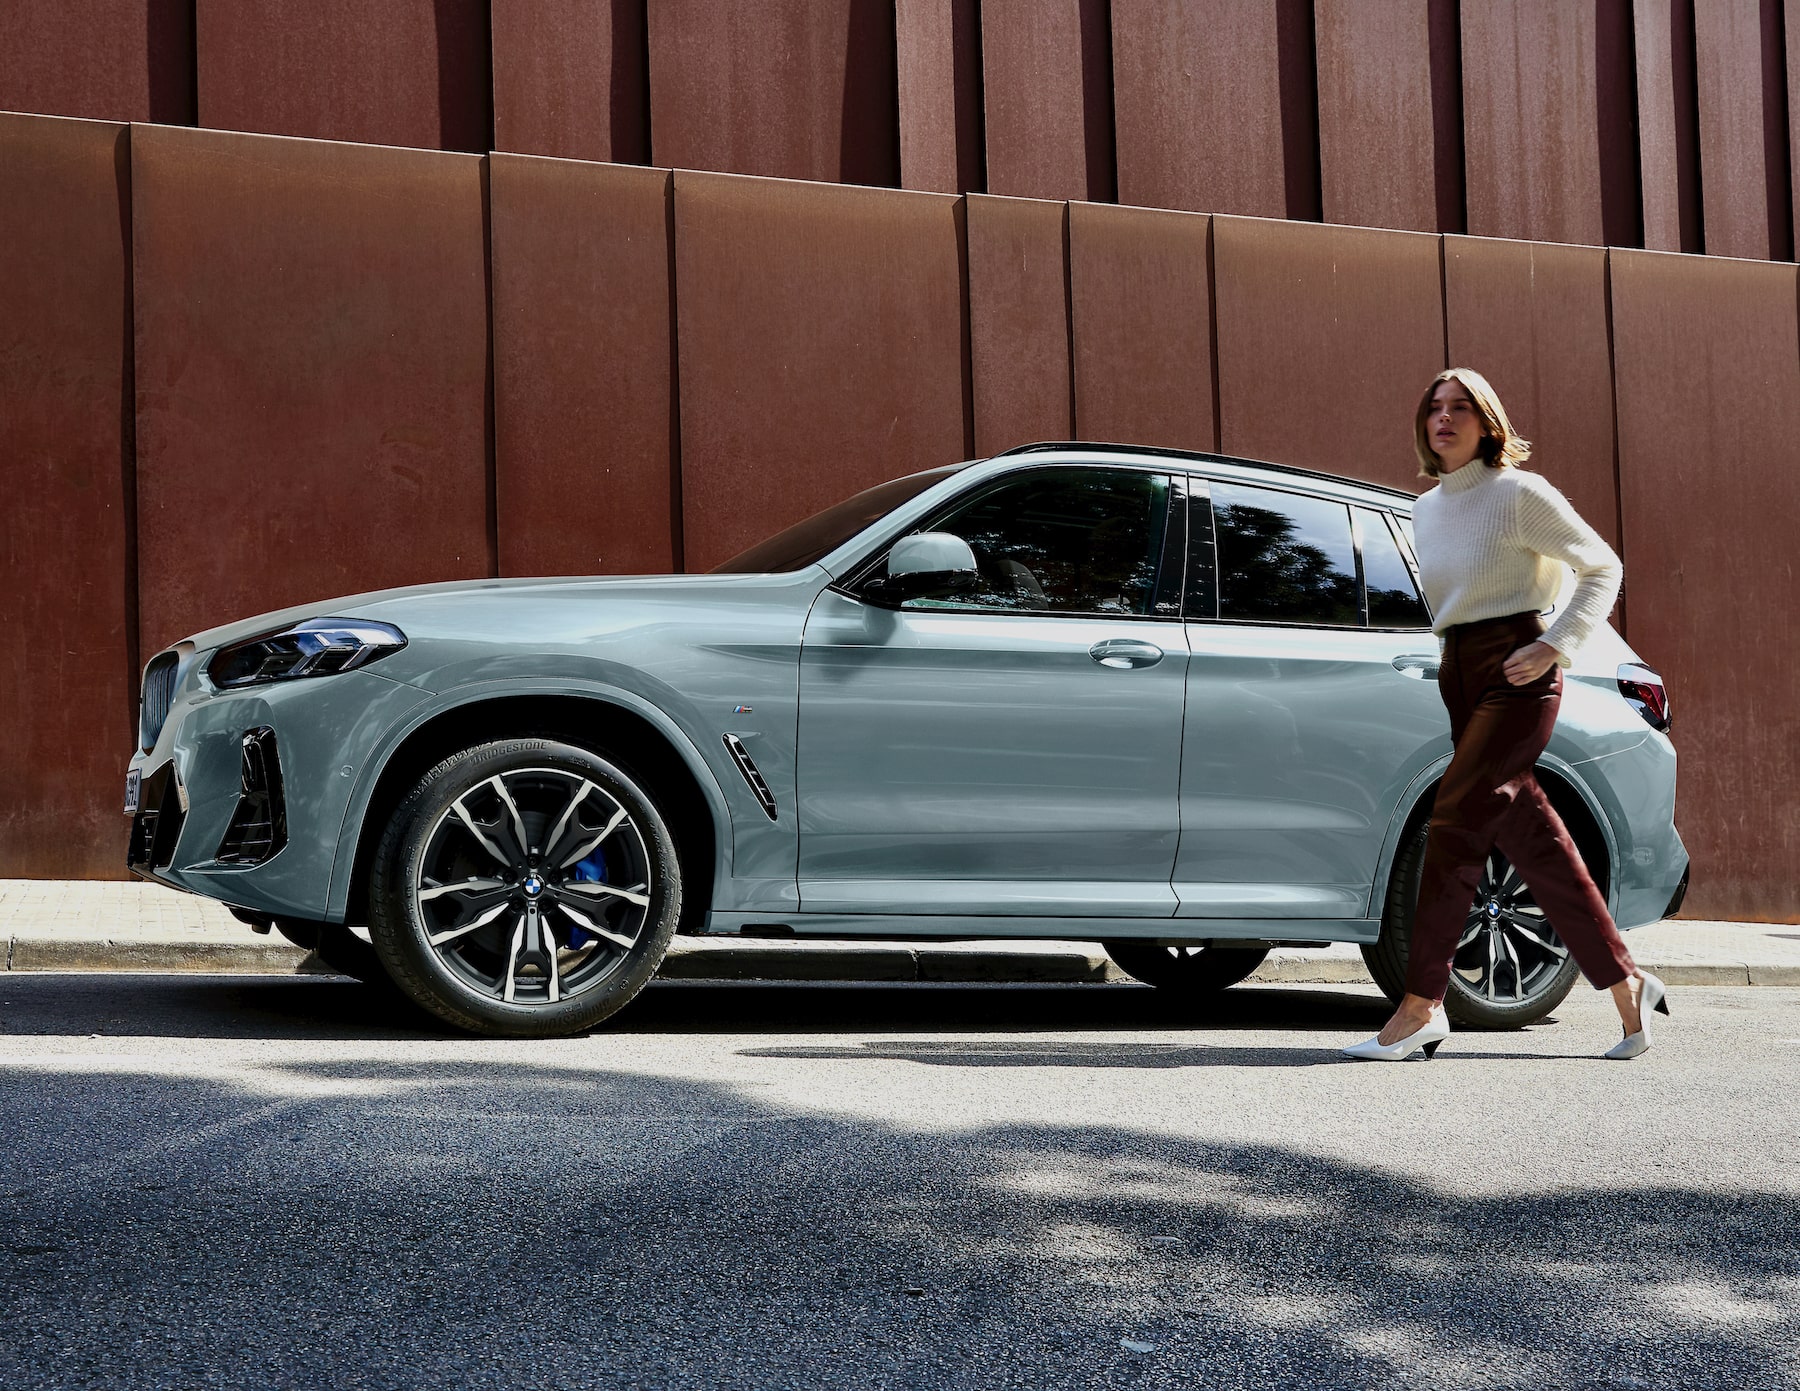 BMW’s Limited-Edition X3 xDrive30i Sport Arrives at $109,900 Drive-away